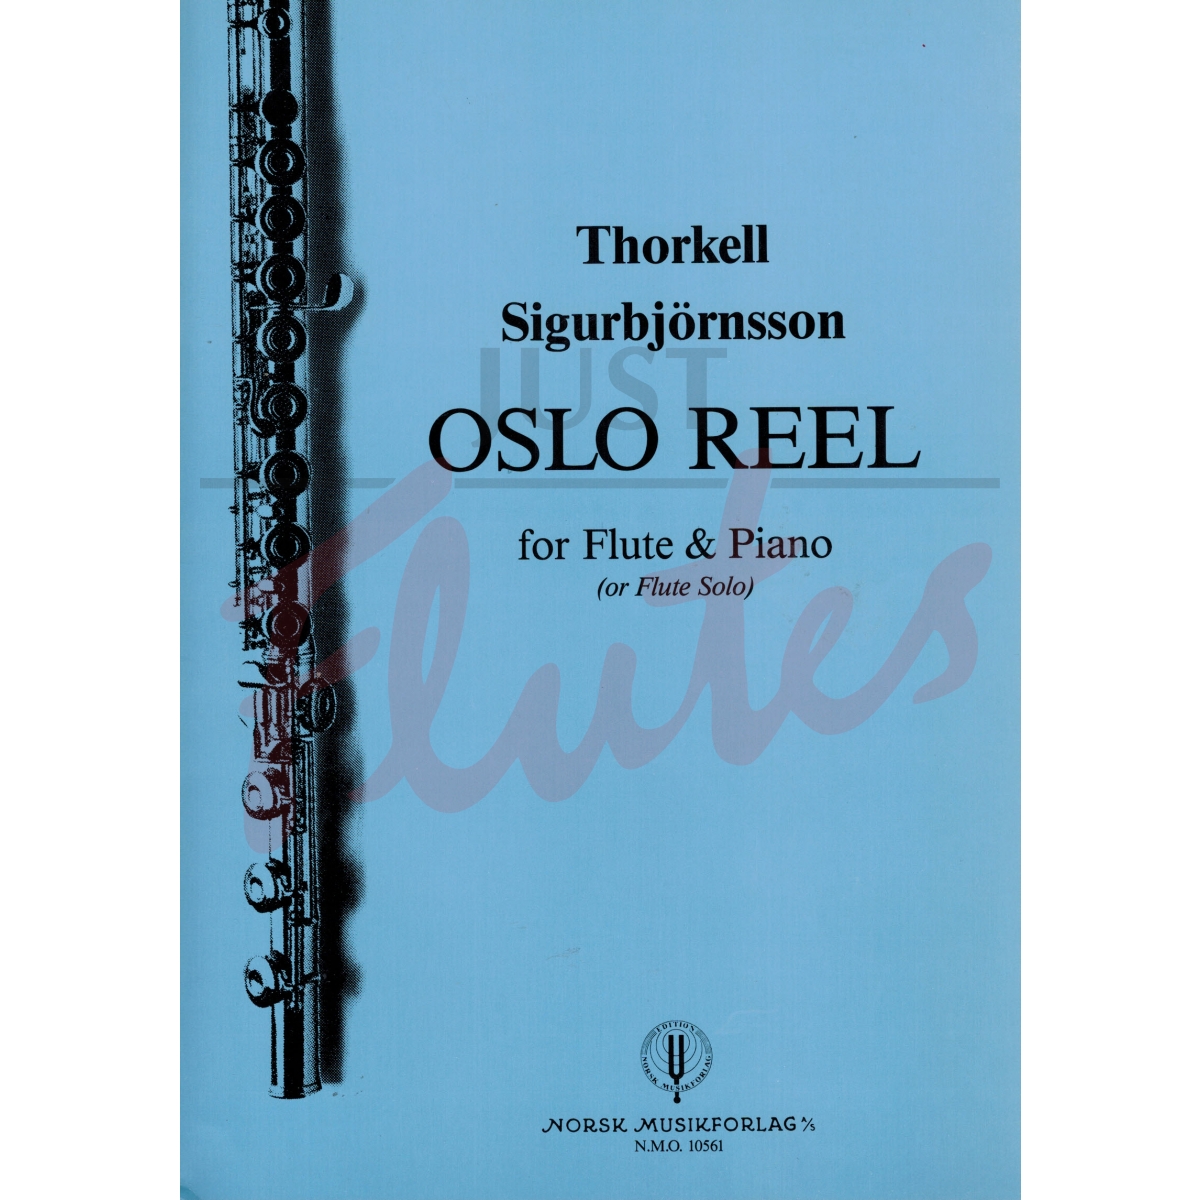 Oslo Reel for Flute and Piano (or Flute Solo)